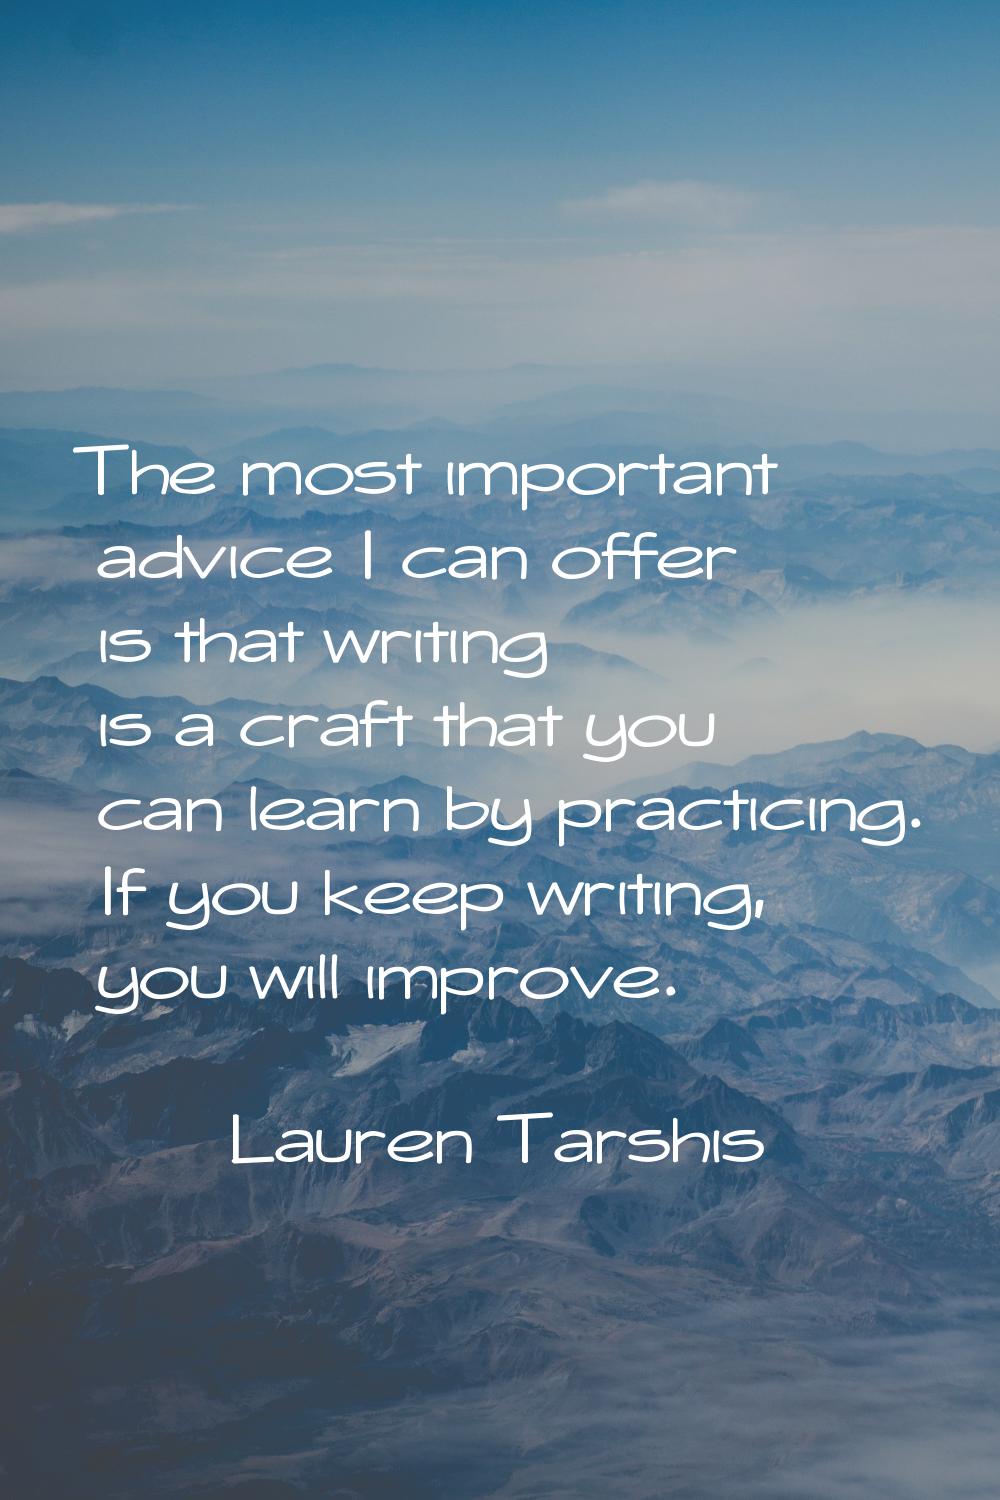 The most important advice I can offer is that writing is a craft that you can learn by practicing. 